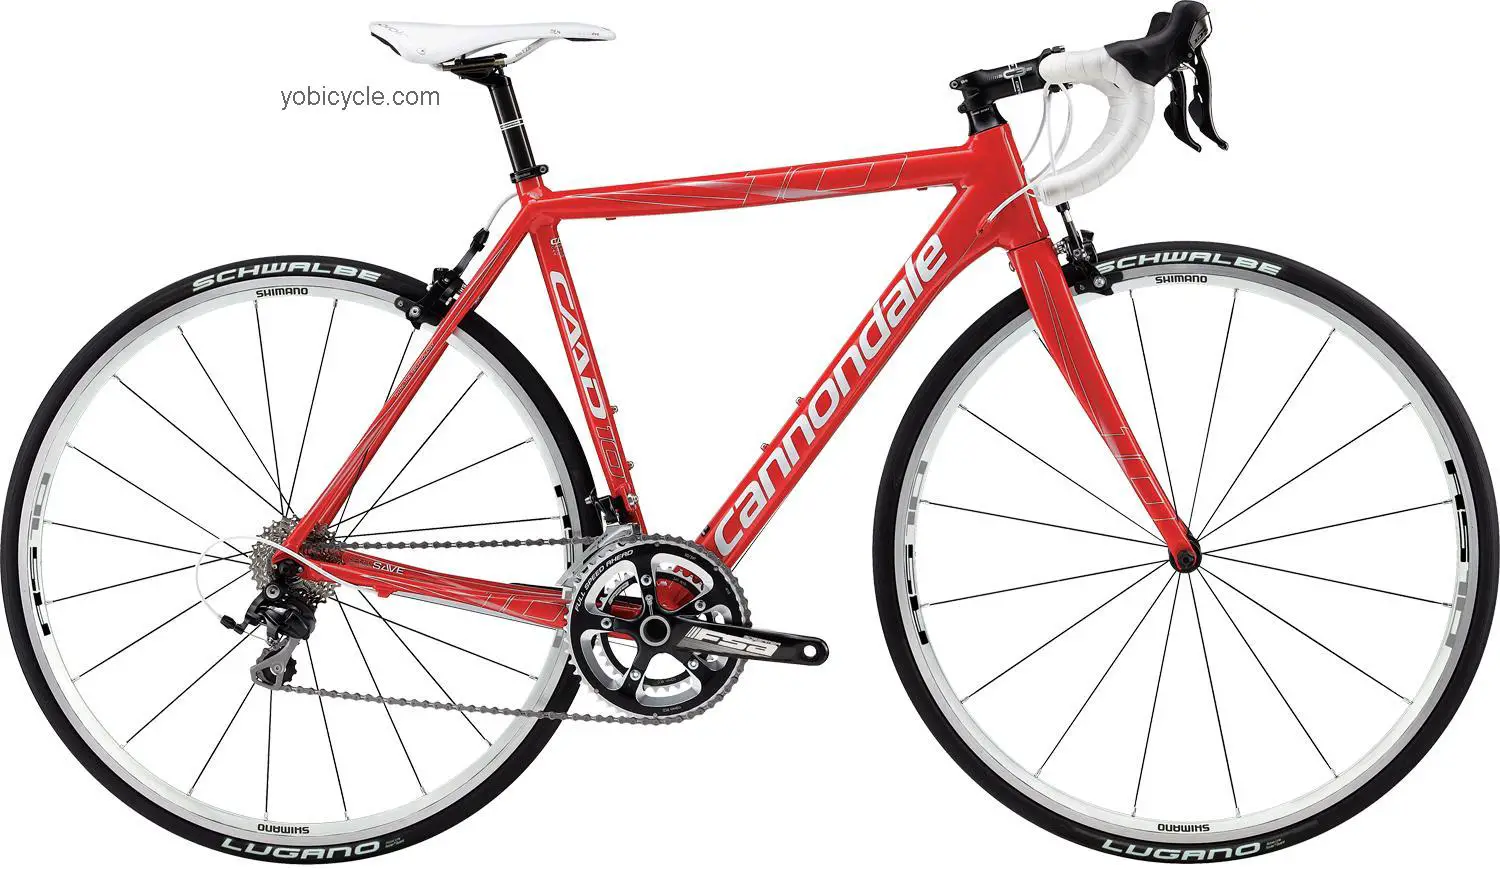 Cannondale CAAD10 Womens 5 105 2013 comparison online with competitors